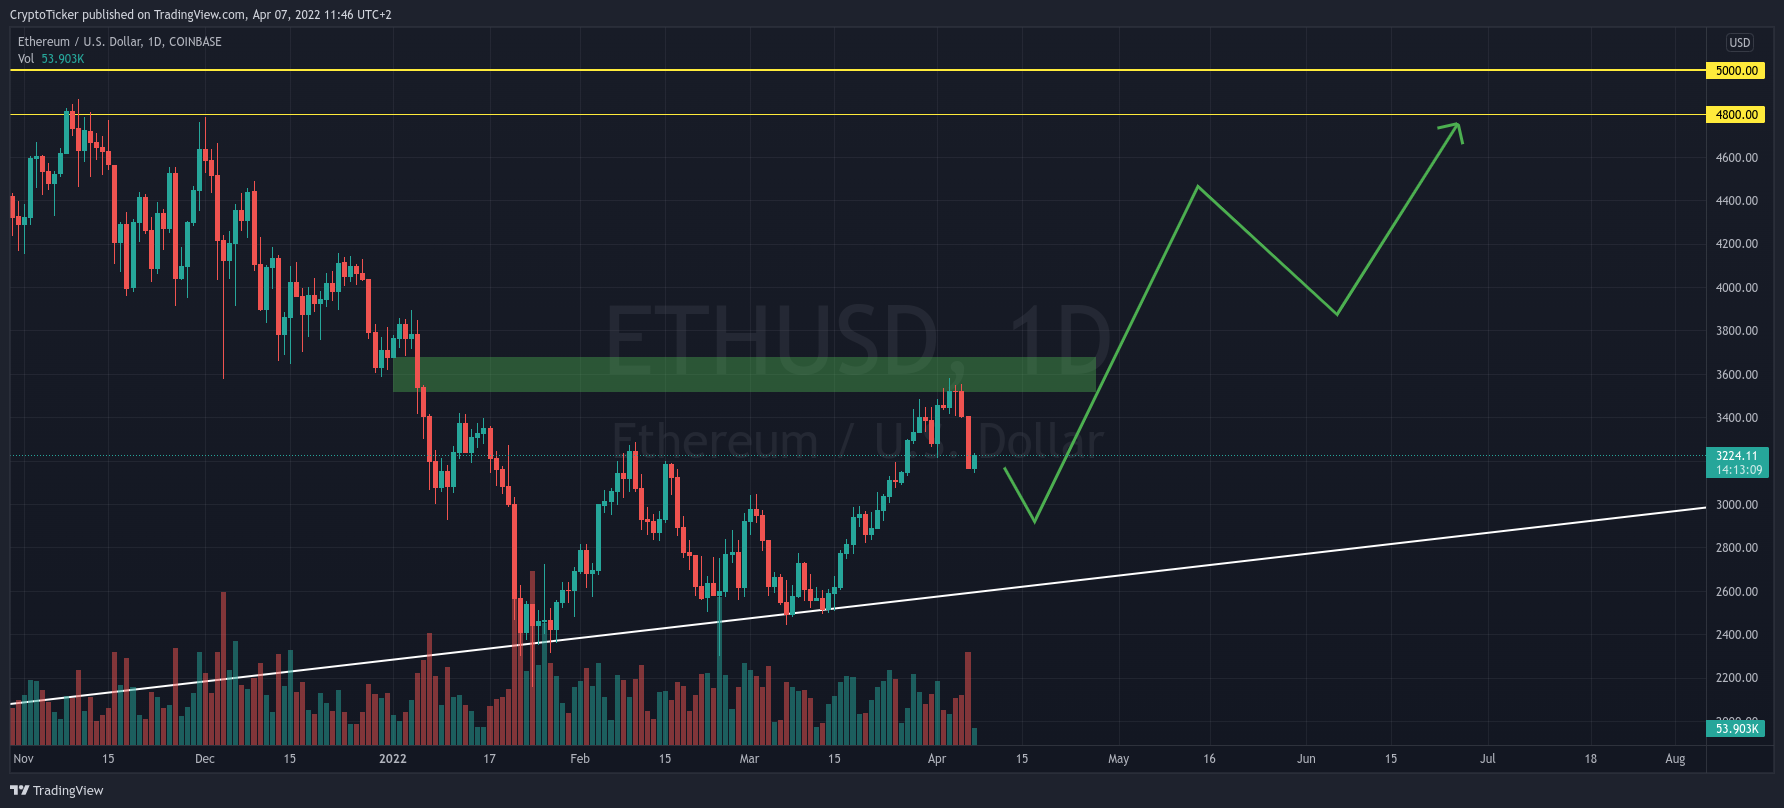 ETH/USD 1-day chart showing the potential trajectory of Ethereum price 5K